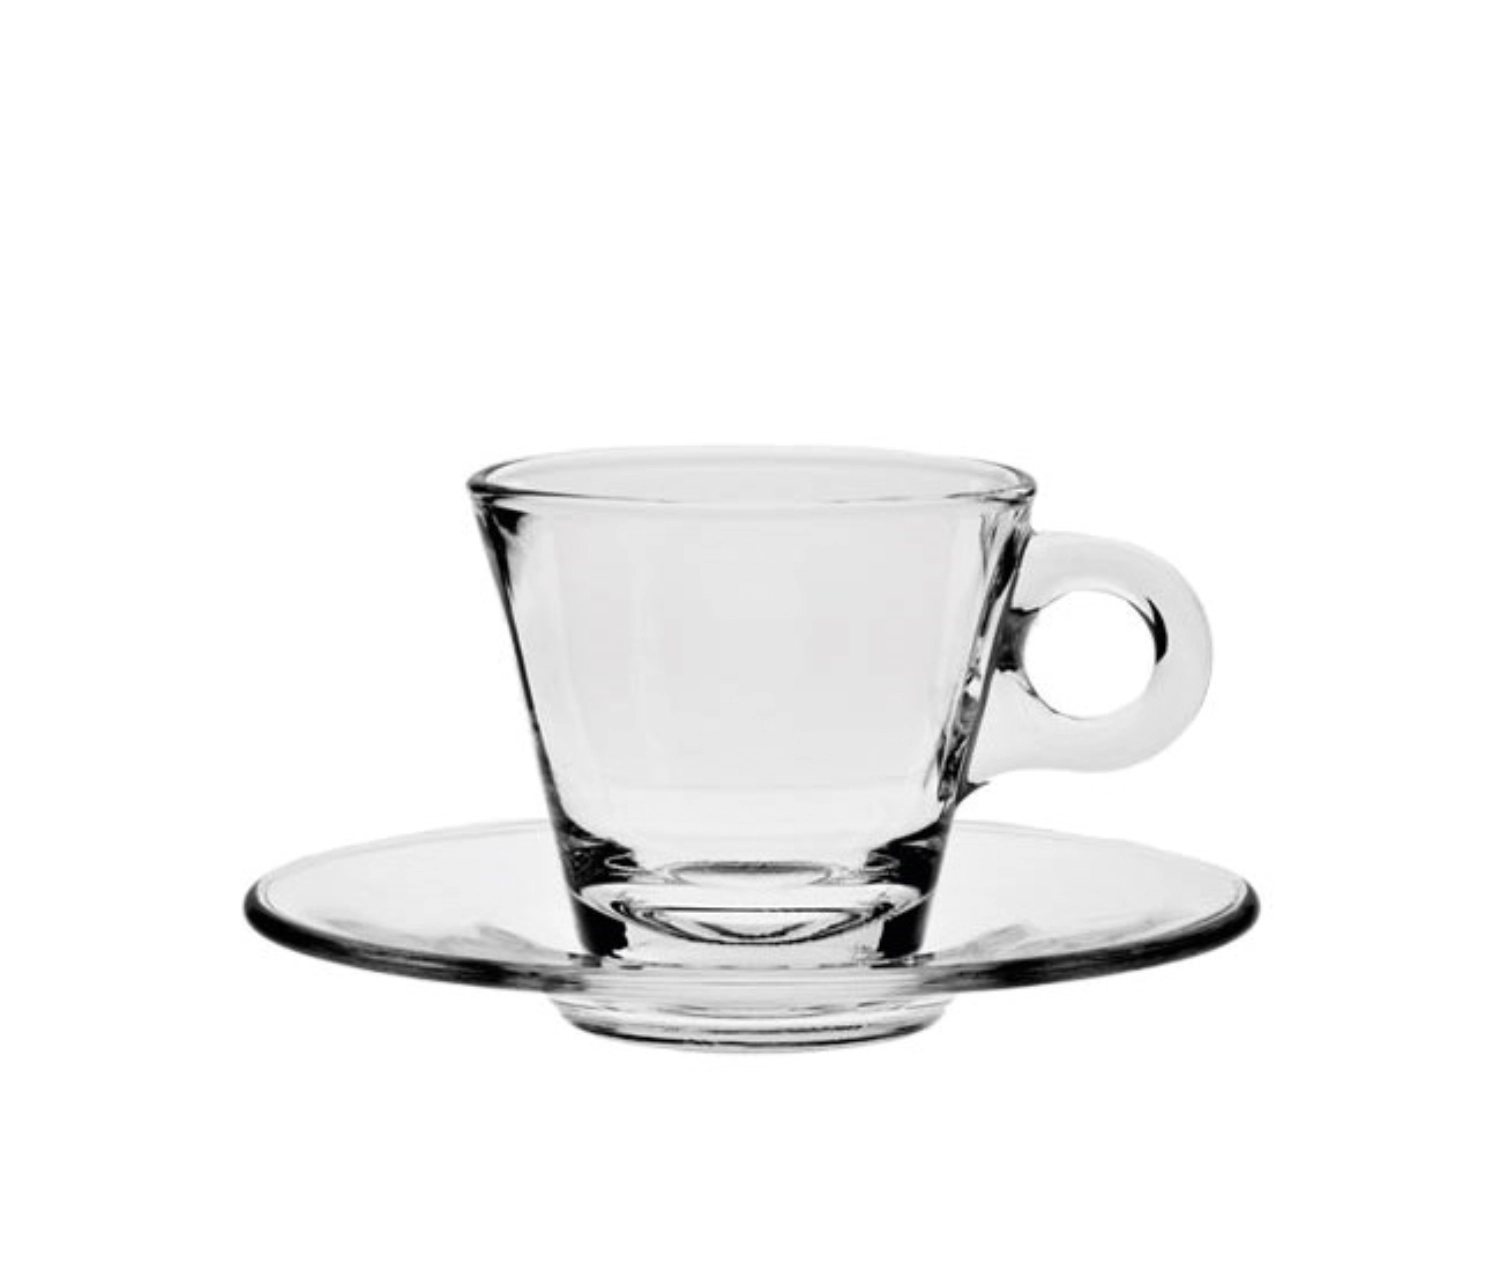 Chicca/conic soucoupe pour cappuccino 15cm